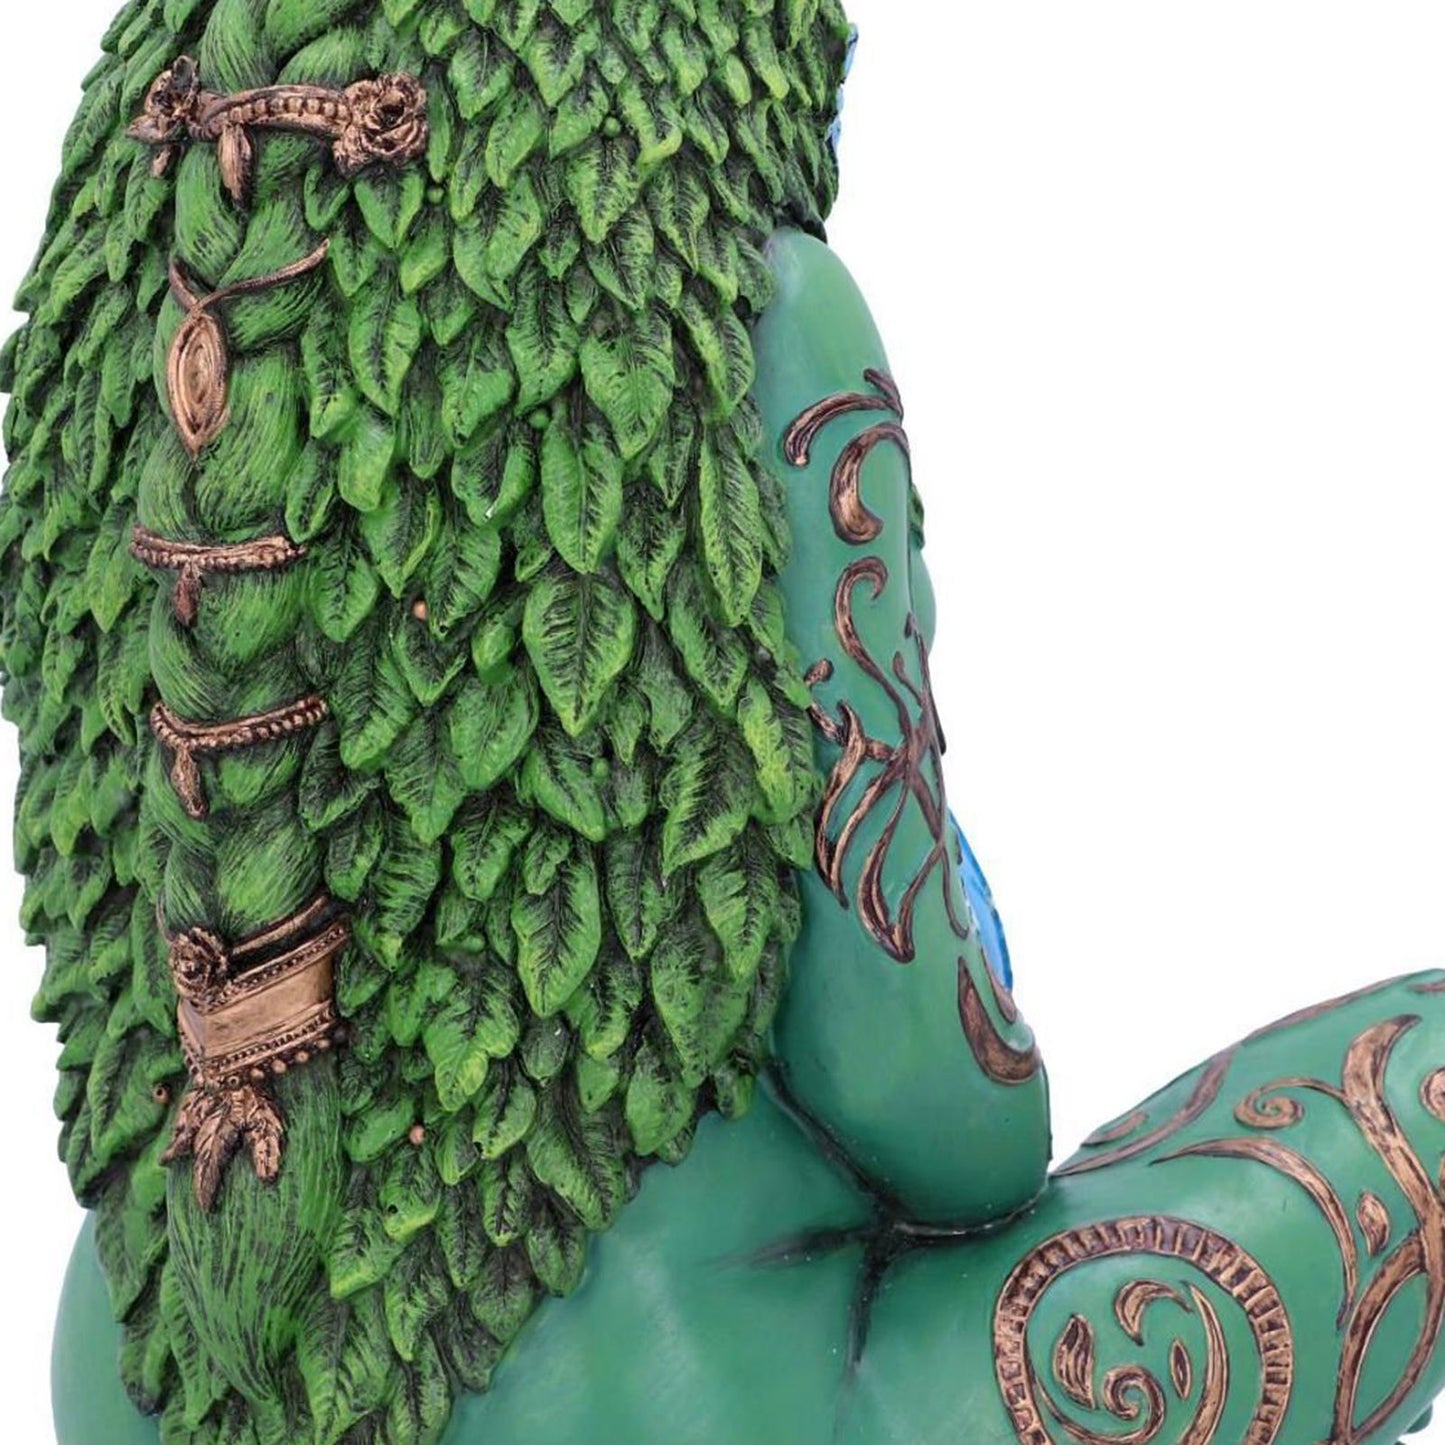 Mother Earth Art Statue Decoration